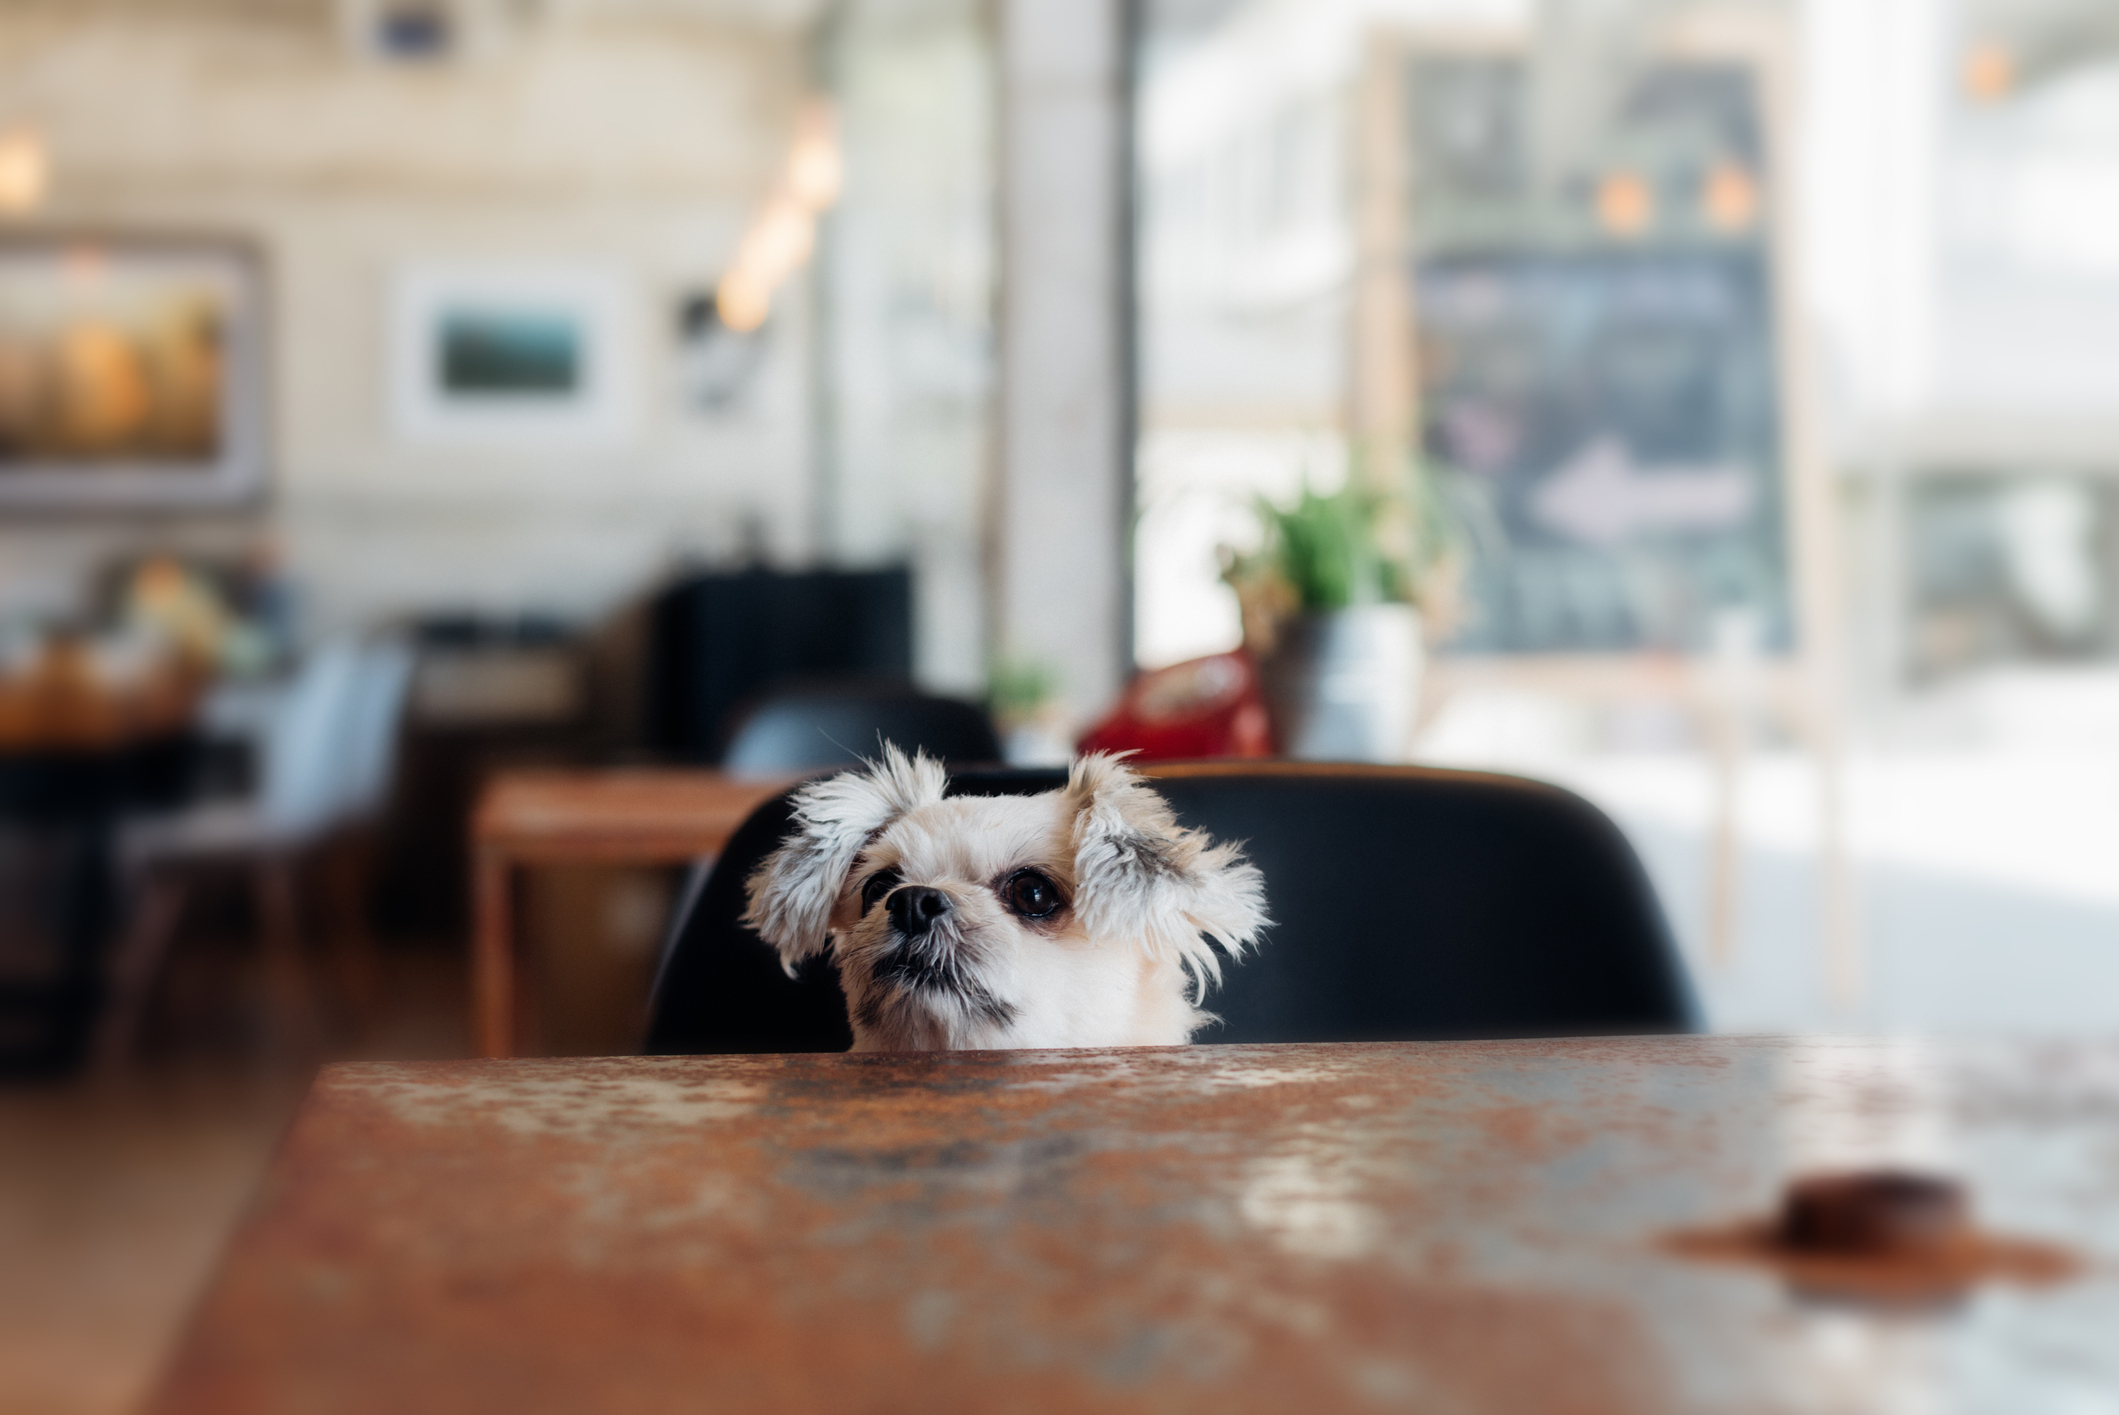 Vicenza, the restaurant where the dog pays the covered